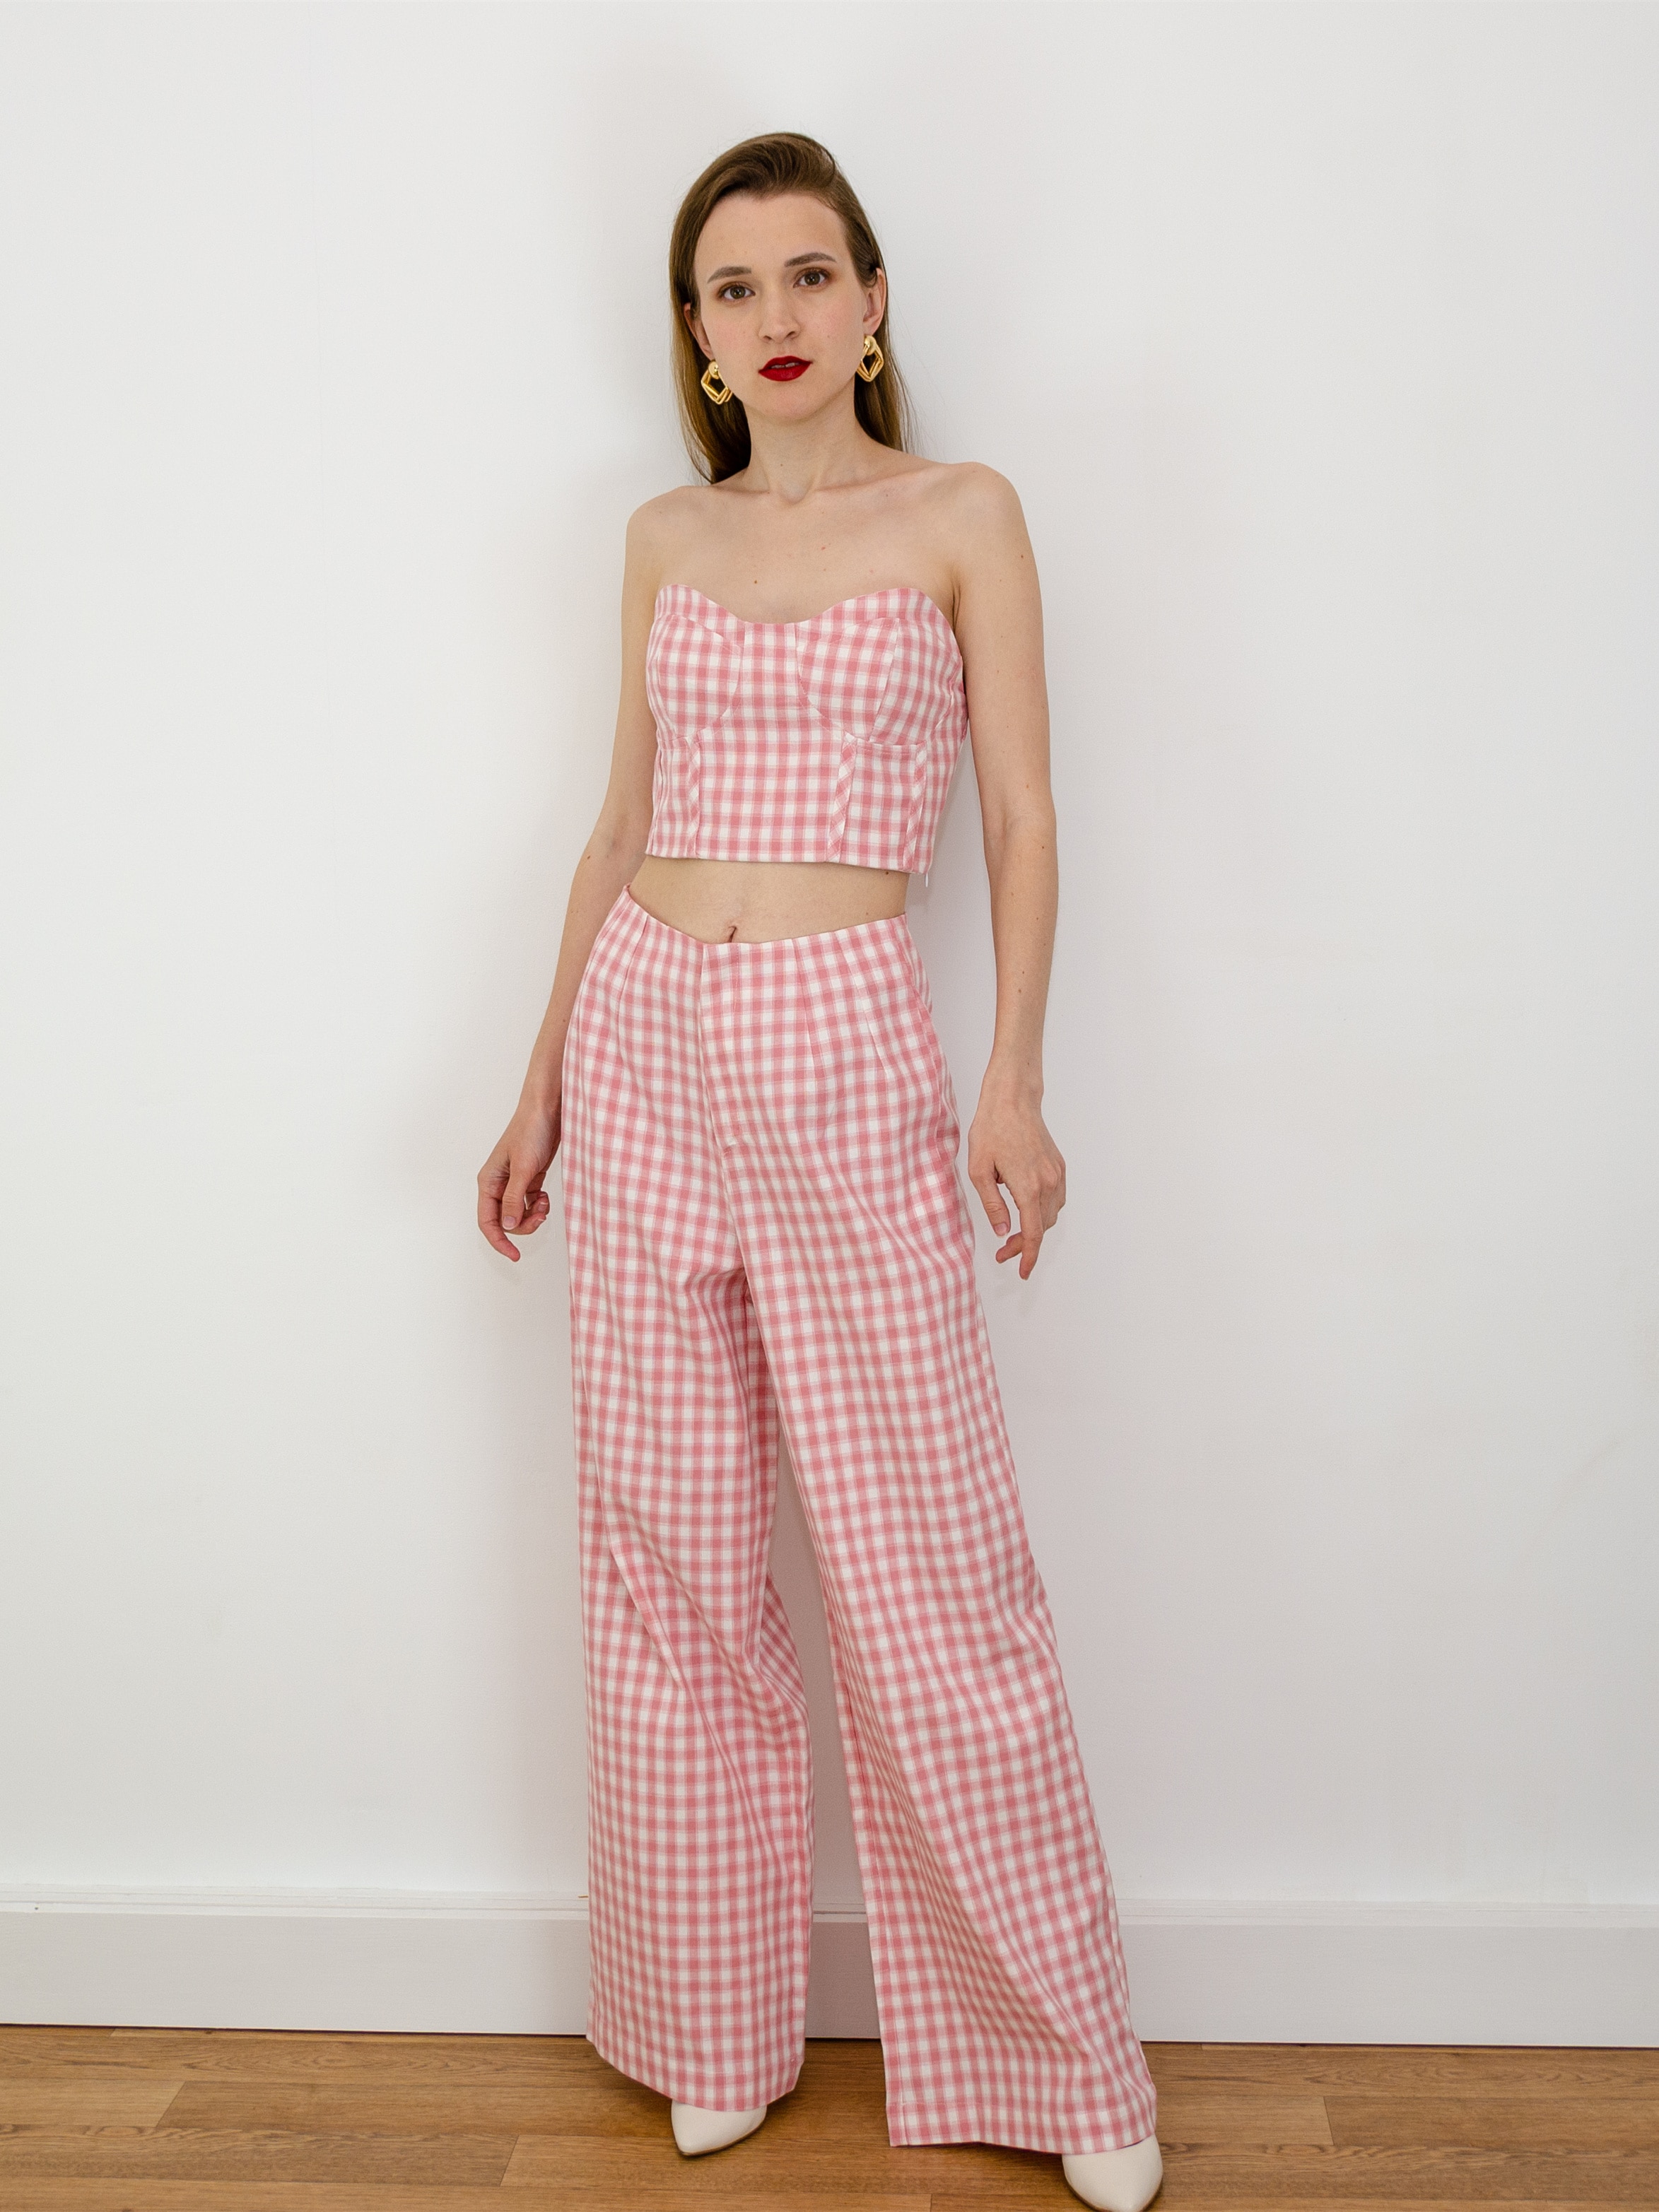 PTYSIC-Women-Fashion-Plaid-Bright-Line-Decoration-Cropped-Corset-Straight-Pants-2022-Summer-Streetwear-Two-Piece-4